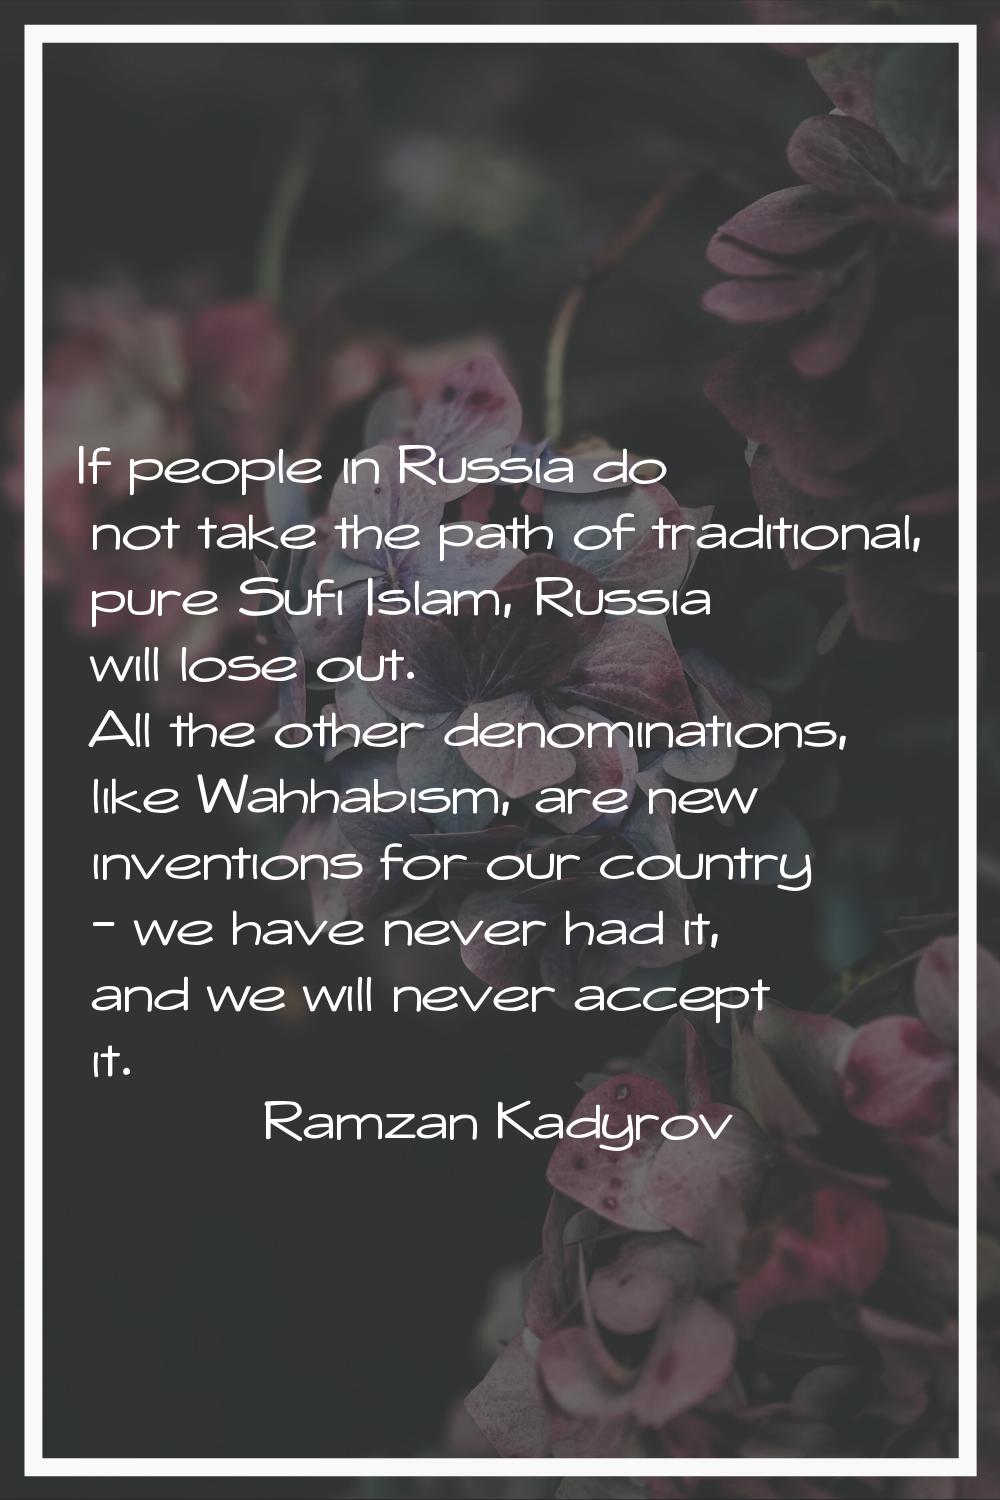 If people in Russia do not take the path of traditional, pure Sufi Islam, Russia will lose out. All